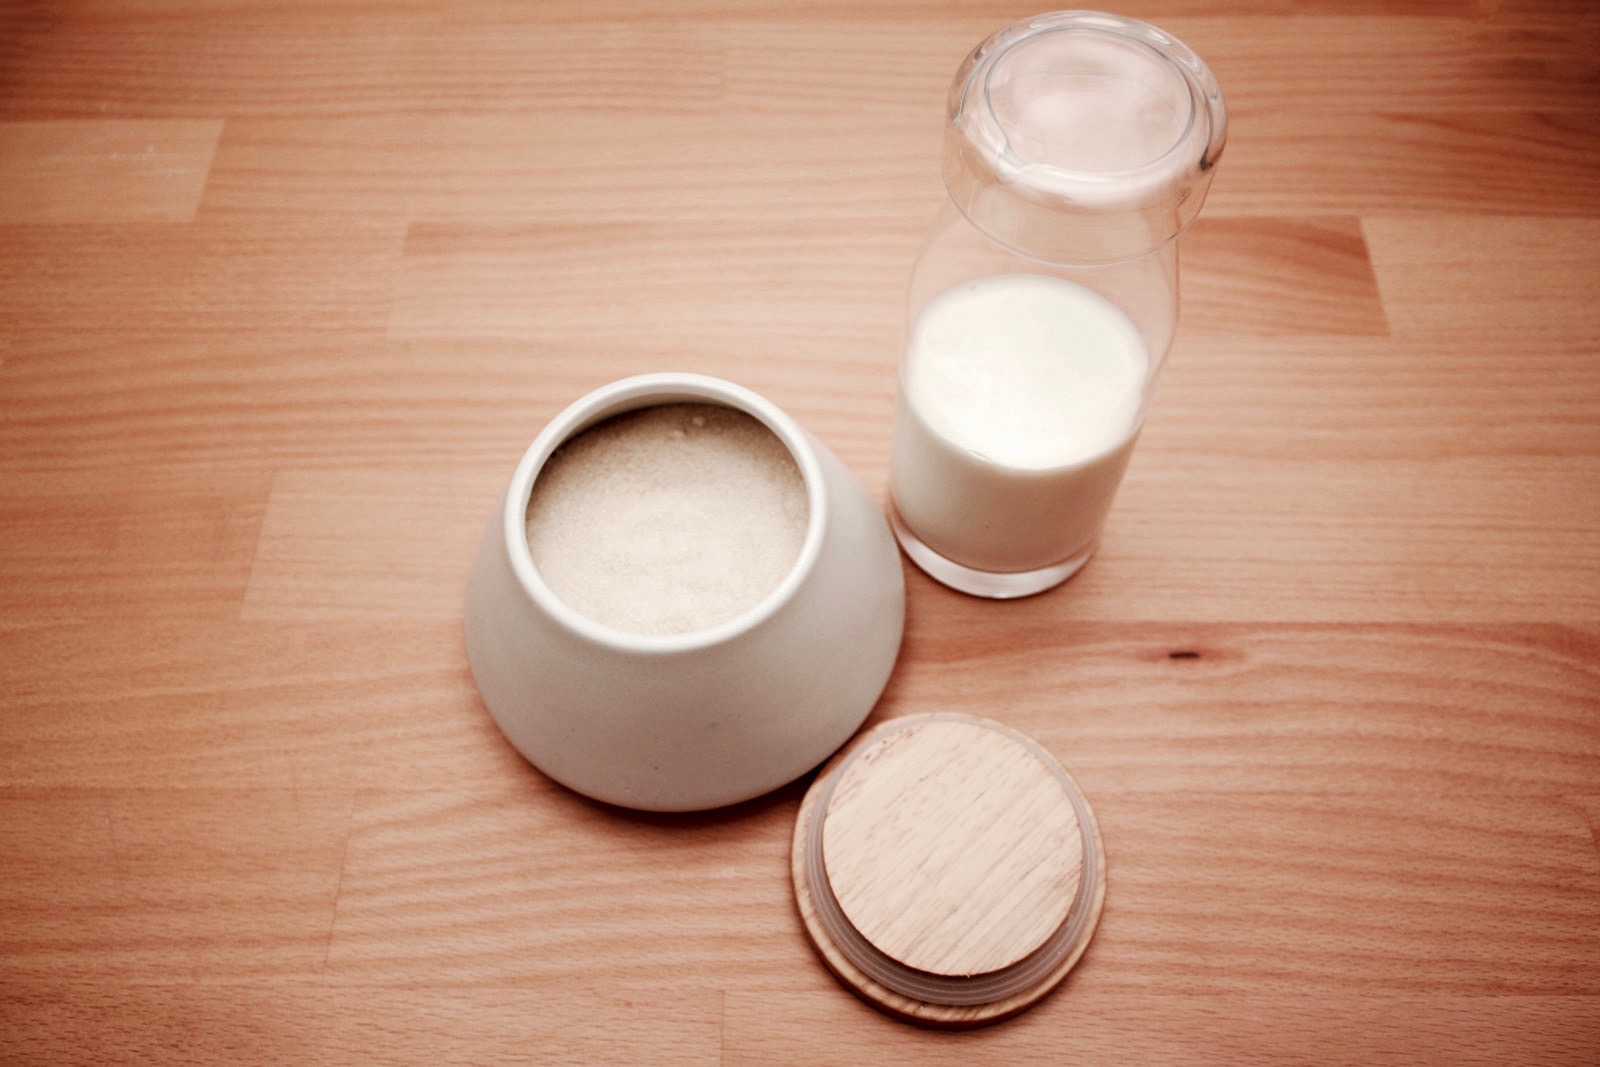 A sugar canister and creamer